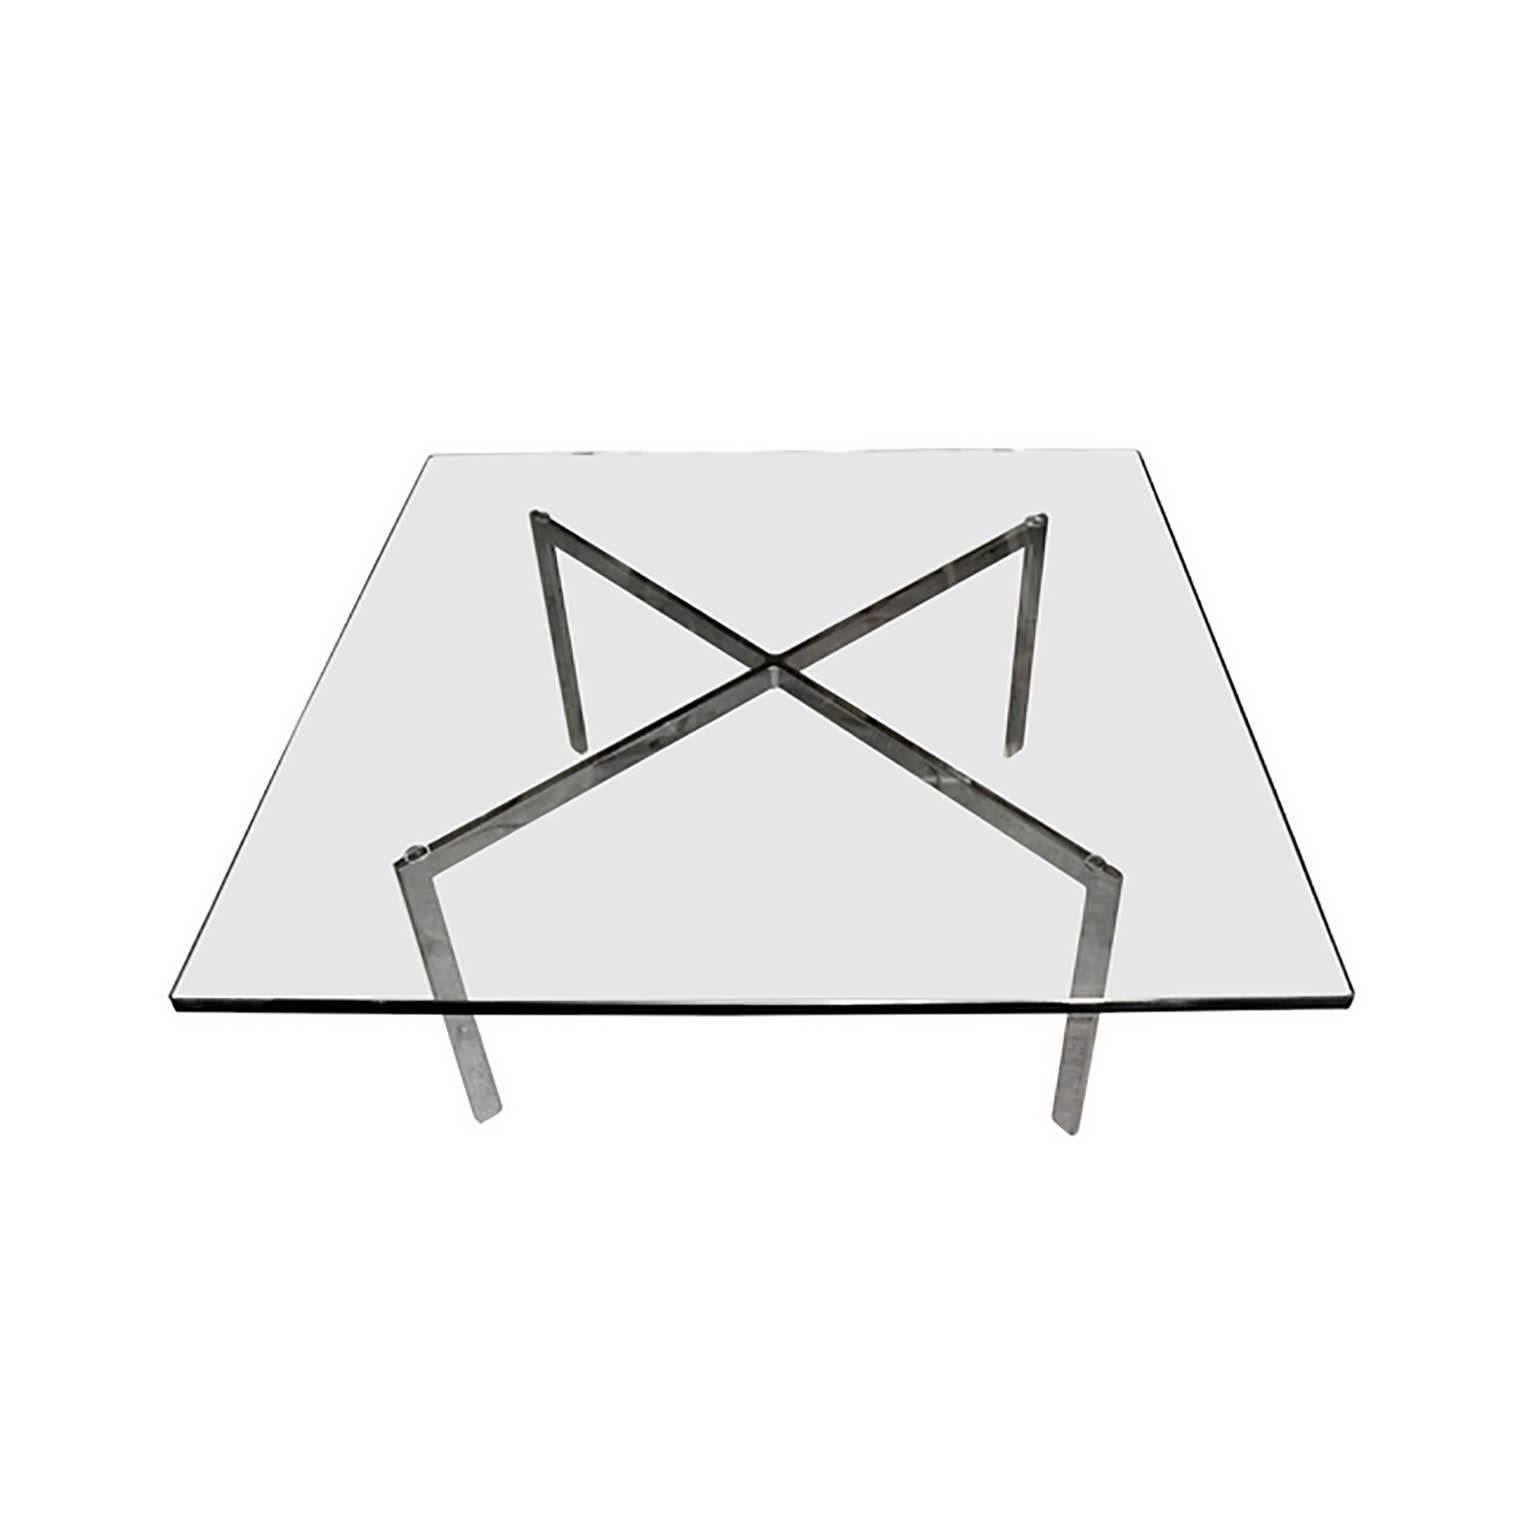 Barcelona coffee table by Mies van der Rohe for Knoll Productions. 
Stainless steel base marked "KP" underneath. 

Architect, furniture designer and educator, Ludwig Mies van der Rohe was a central figure in the advancement and promotion